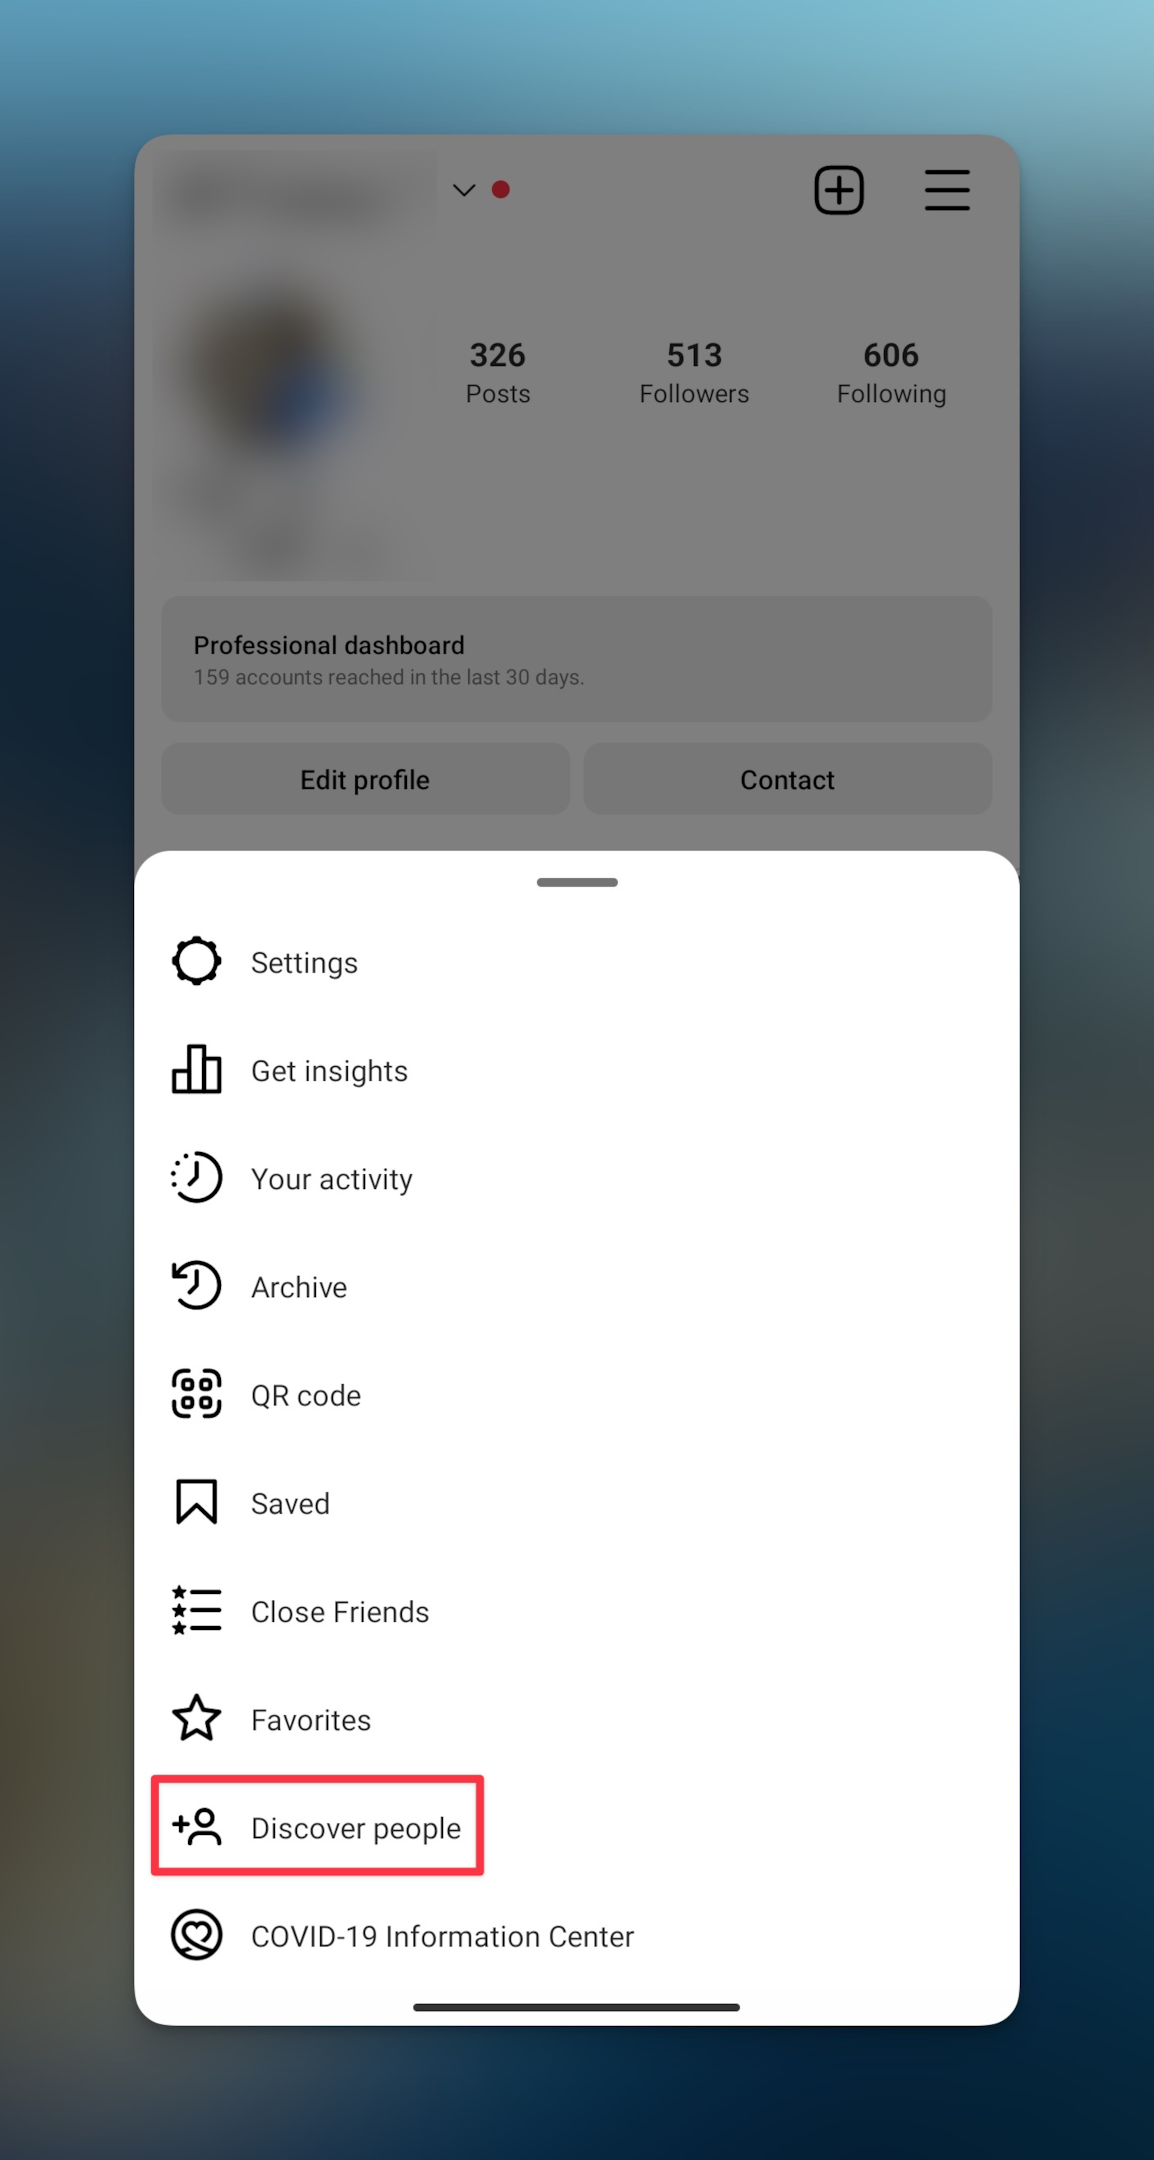 Remote.tools shows to discover people on Instagram app for Android